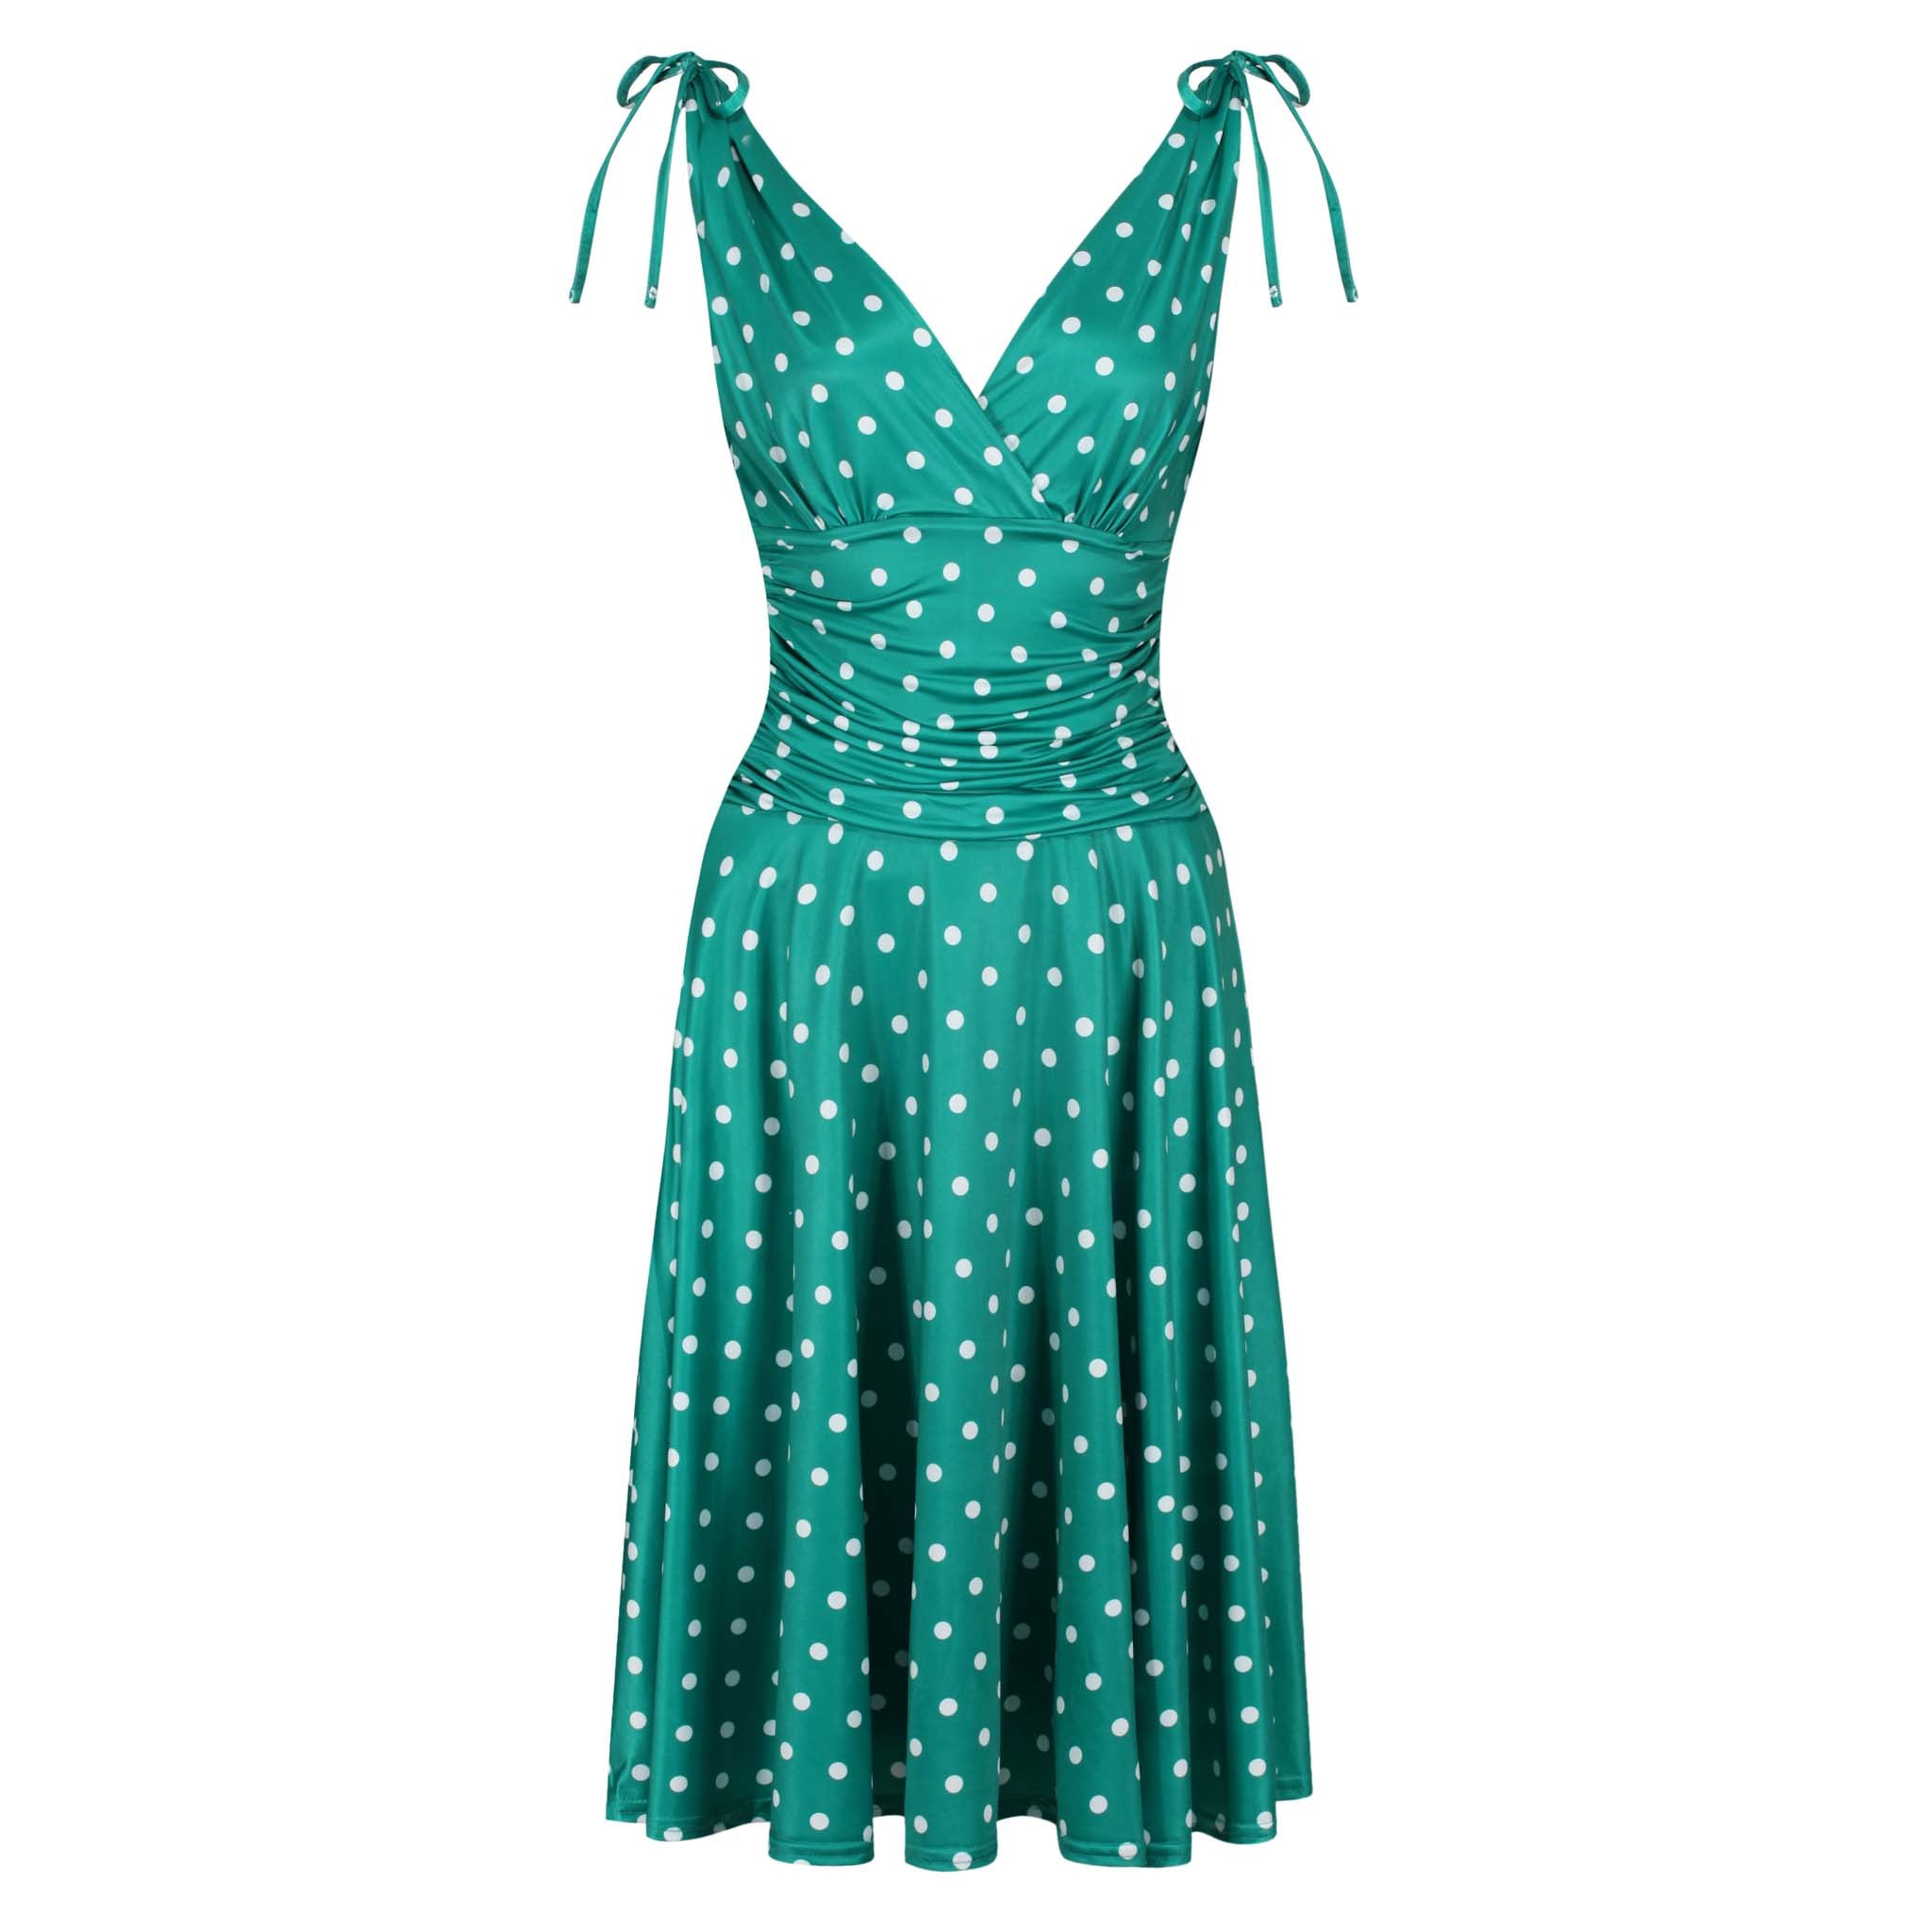 Green And White Polka Dot Print Crossover Top Grecian V Neck 50s Swing Dress